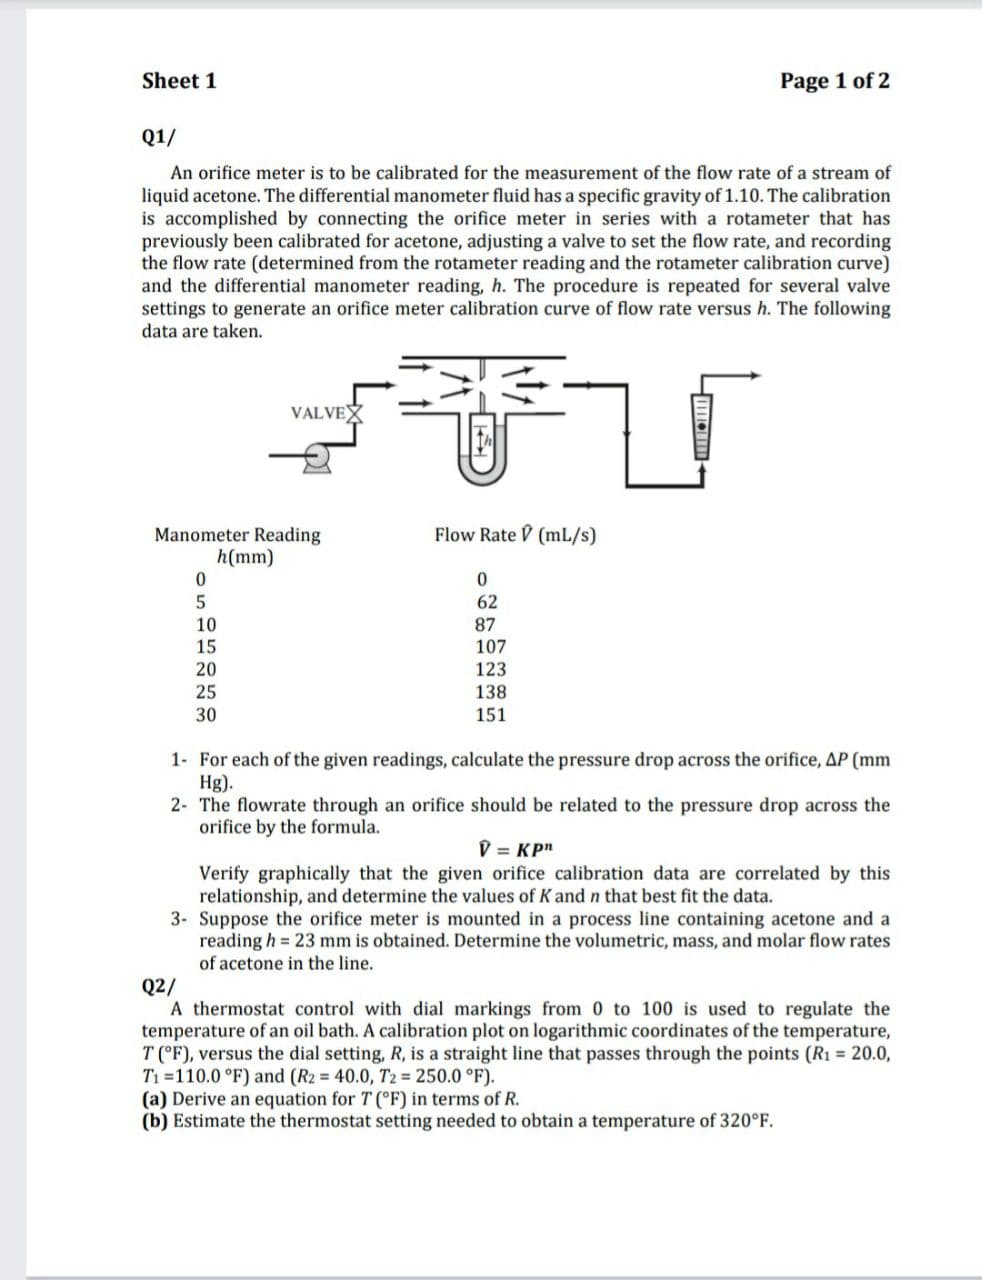 Sheet 1
Page 1 of 2
Q1/
An orifice meter is to be calibrated for the measurement of the flow rate of a stream of
liquid acetone. The differential manometer fluid has a specific gravity of 1.10. The calibration
is accomplished by connecting the orifice meter in series with a rotameter that has
previously been calibrated for acetone, adjusting a valve to set the flow rate, and recording
the flow rate (determined from the rotameter reading and the rotameter calibration curve)
and the differential manometer reading, h. The procedure is repeated for several valve
settings to generate an orifice meter calibration curve of flow rate versus h. The following
data are taken.
VALVEX
Flow Rate V (mL/s)
Manometer Reading
h(mm)
62
10
87
15
107
20
123
138
25
30
151
1- For each of the given readings, calculate the pressure drop across the orifice, AP (mm
Hg).
2- The flowrate through an orifice should be related to the pressure drop across the
orifice by the formula.
D = KPn
Verify graphically that the given orifice calibration data are correlated by this
relationship, and determine the values of K and n that best fit the data.
3- Suppose the orifice meter is mounted in a process line containing acetone and a
reading h = 23 mm is obtained. Determine the volumetric, mass, and molar flow rates
of acetone in the line.
Q2/
A thermostat control with dial markings from 0 to 100 is used to regulate the
temperature of an oil bath. A calibration plot on logarithmic coordinates of the temperature,
T (°F), versus the dial setting, R, is a straight line that passes through the points (R1 = 20.0,
T1 =110.0 °F) and (R2 = 40.0, T2 = 250.0 °F).
(a) Derive an equation for T (°F) in terms of R.
(b) Estimate the thermostat setting needed to obtain a temperature of 320°F.
